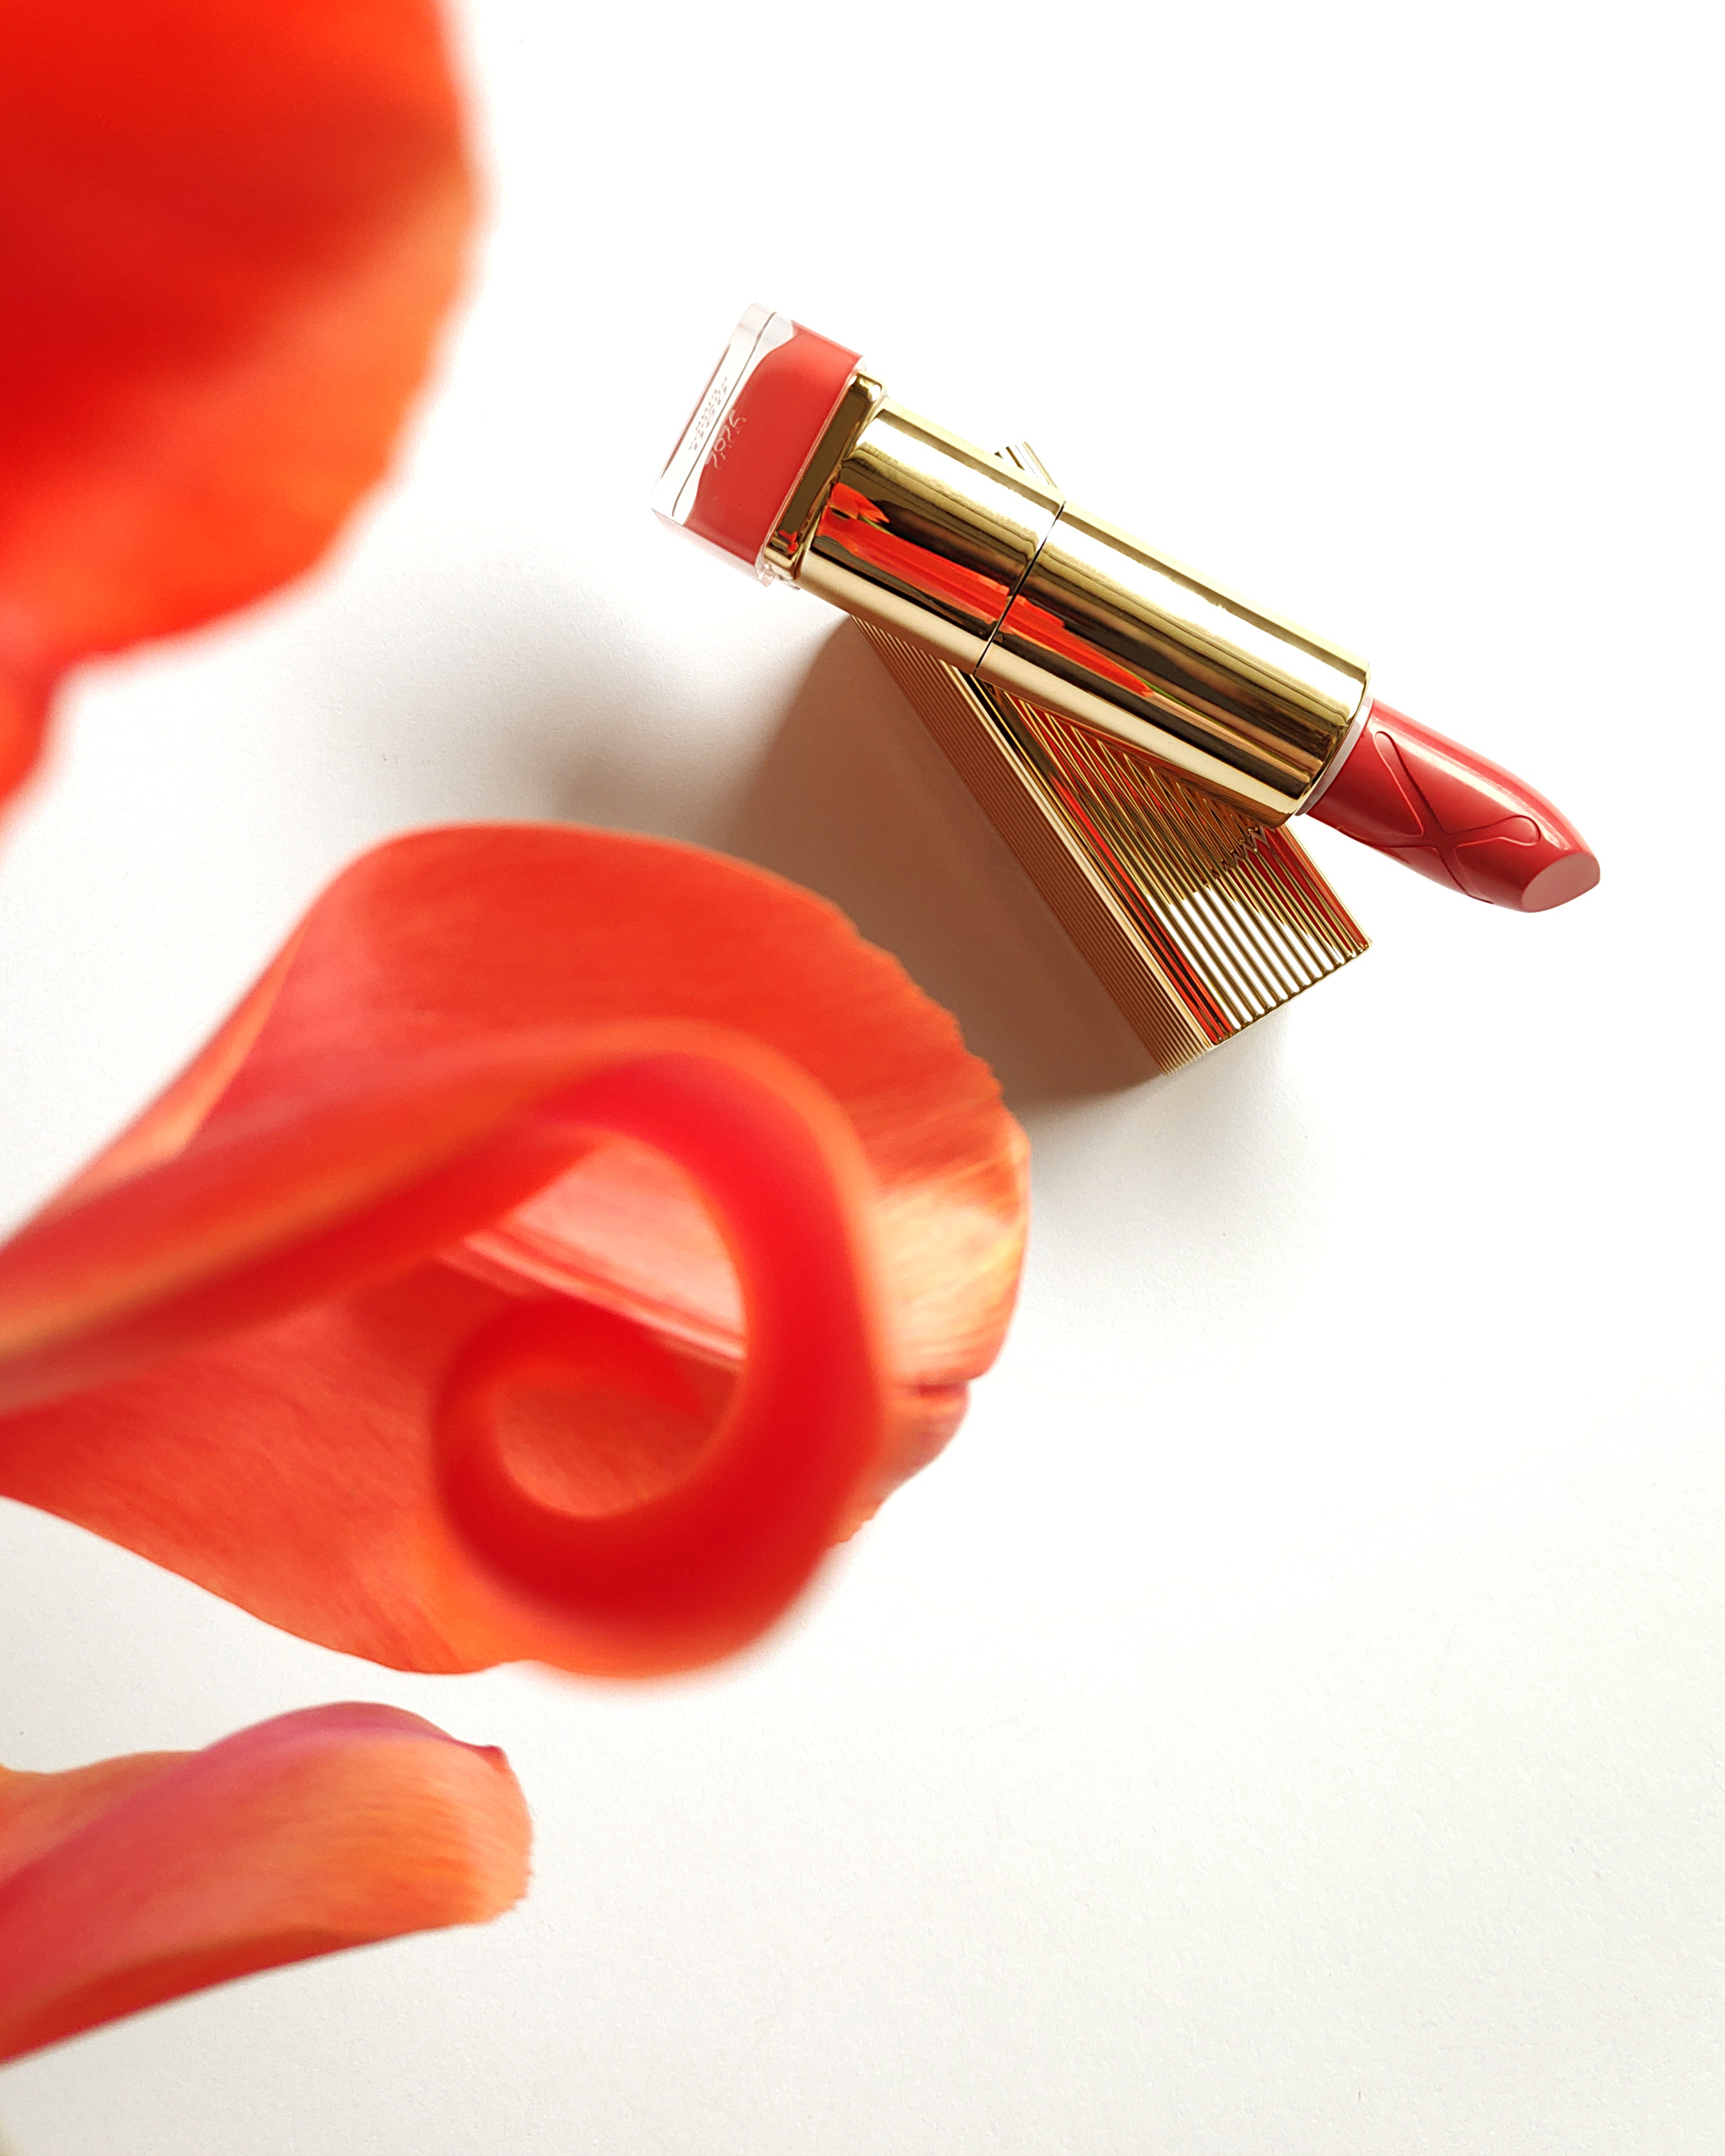 Max Factor Colour Elixir Lipstick in 050 Pink Brandy, a vibrant coral lipstick with open cap, and a bright red tulip next to it on a white background.